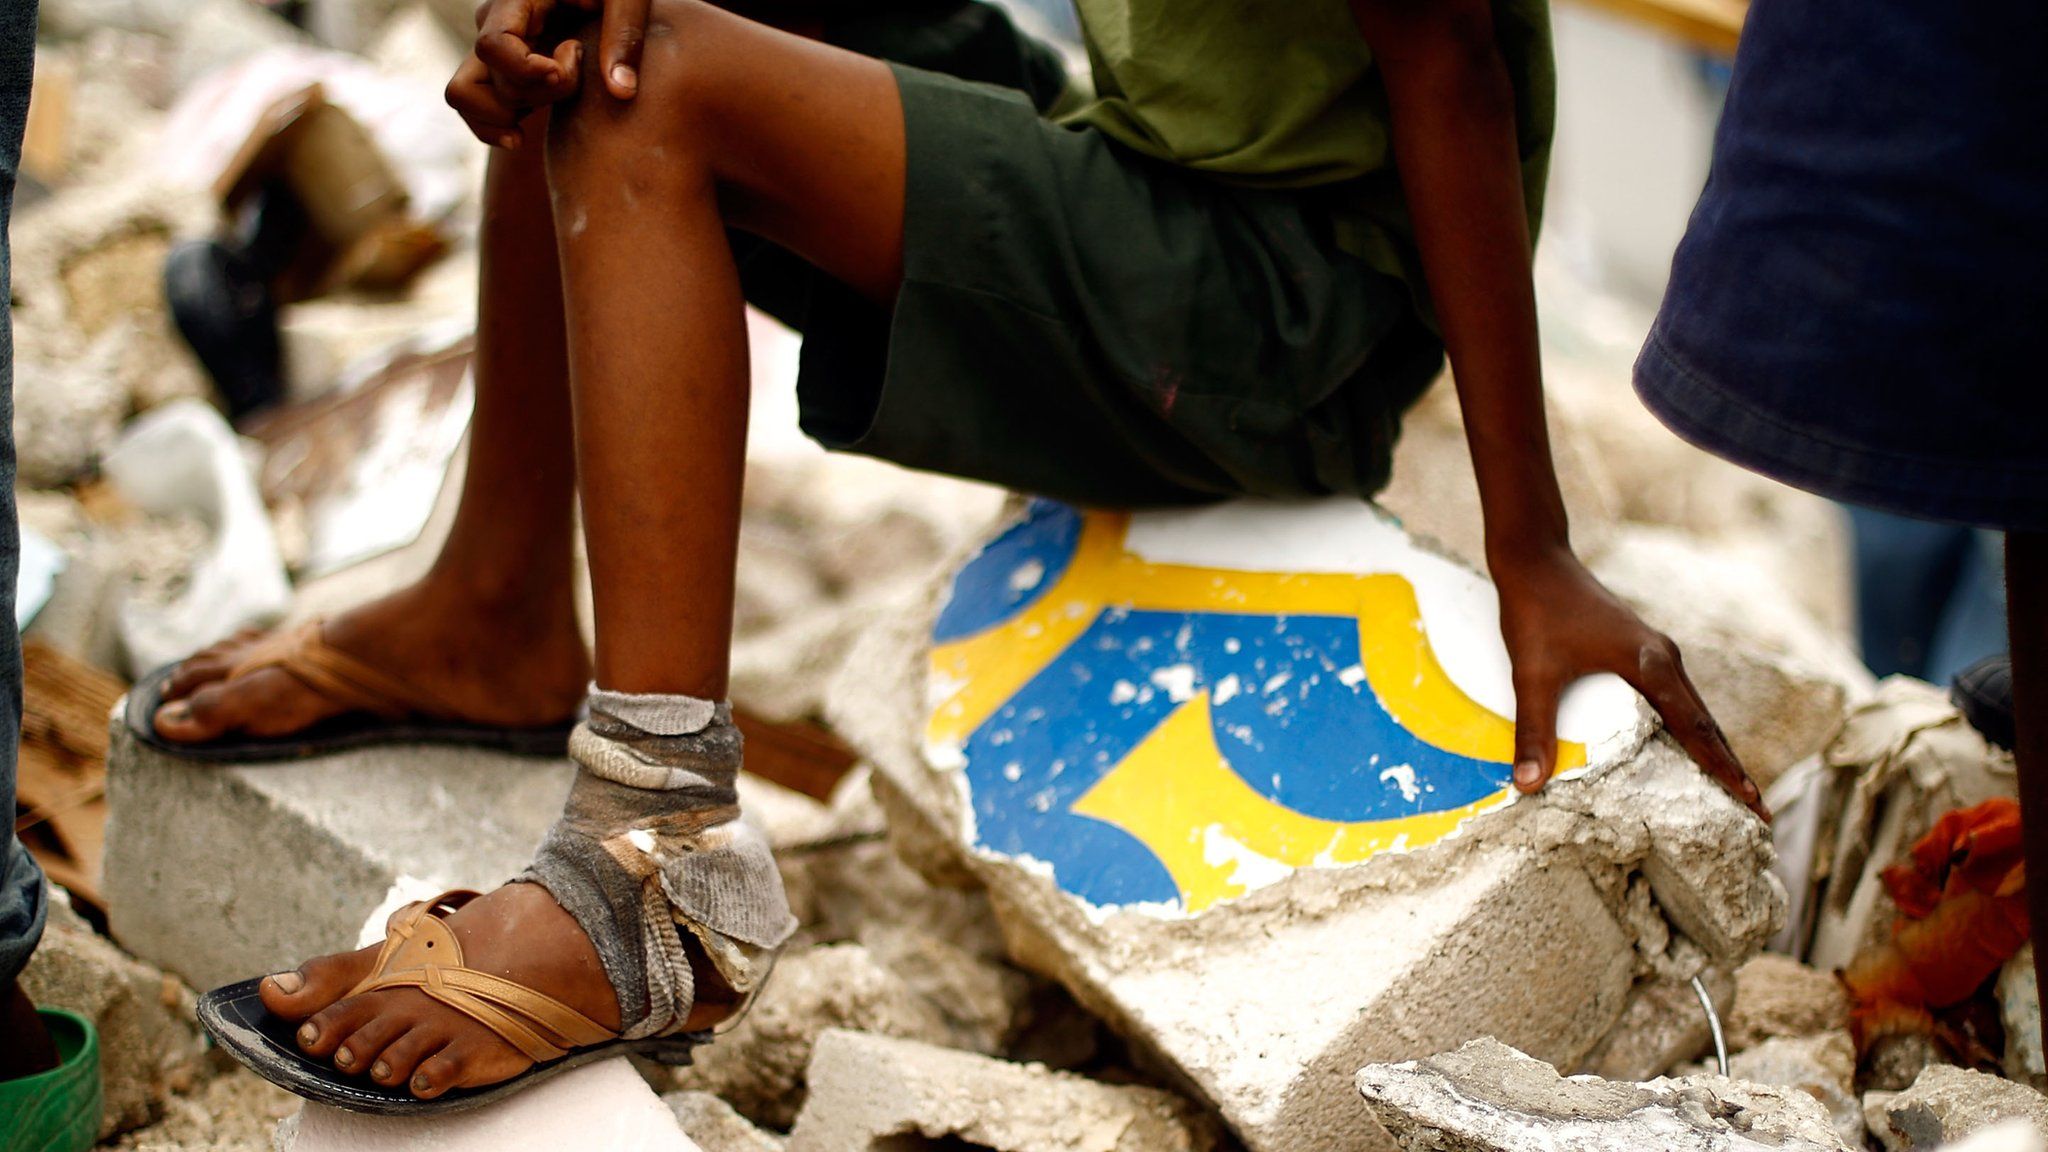 A young boy sits on a pile of rubble while watching others search a collapsed building for goods February 18, 2010 in Port-au-Prince, Haiti.